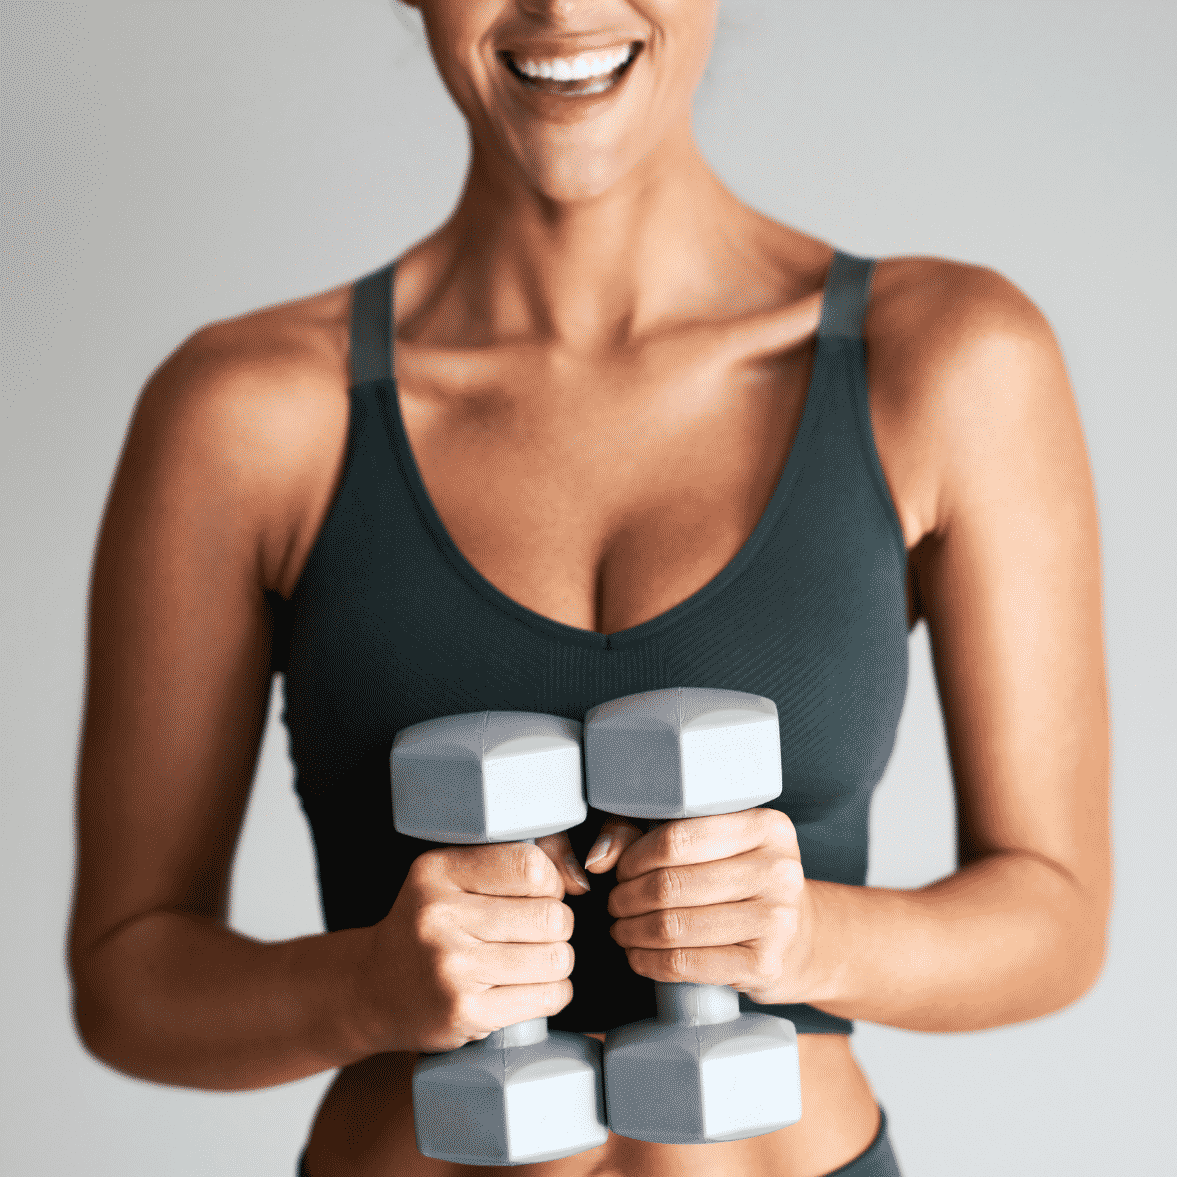 Tone and Sculpt Your Arms with Effective Flabby Arm Exercises